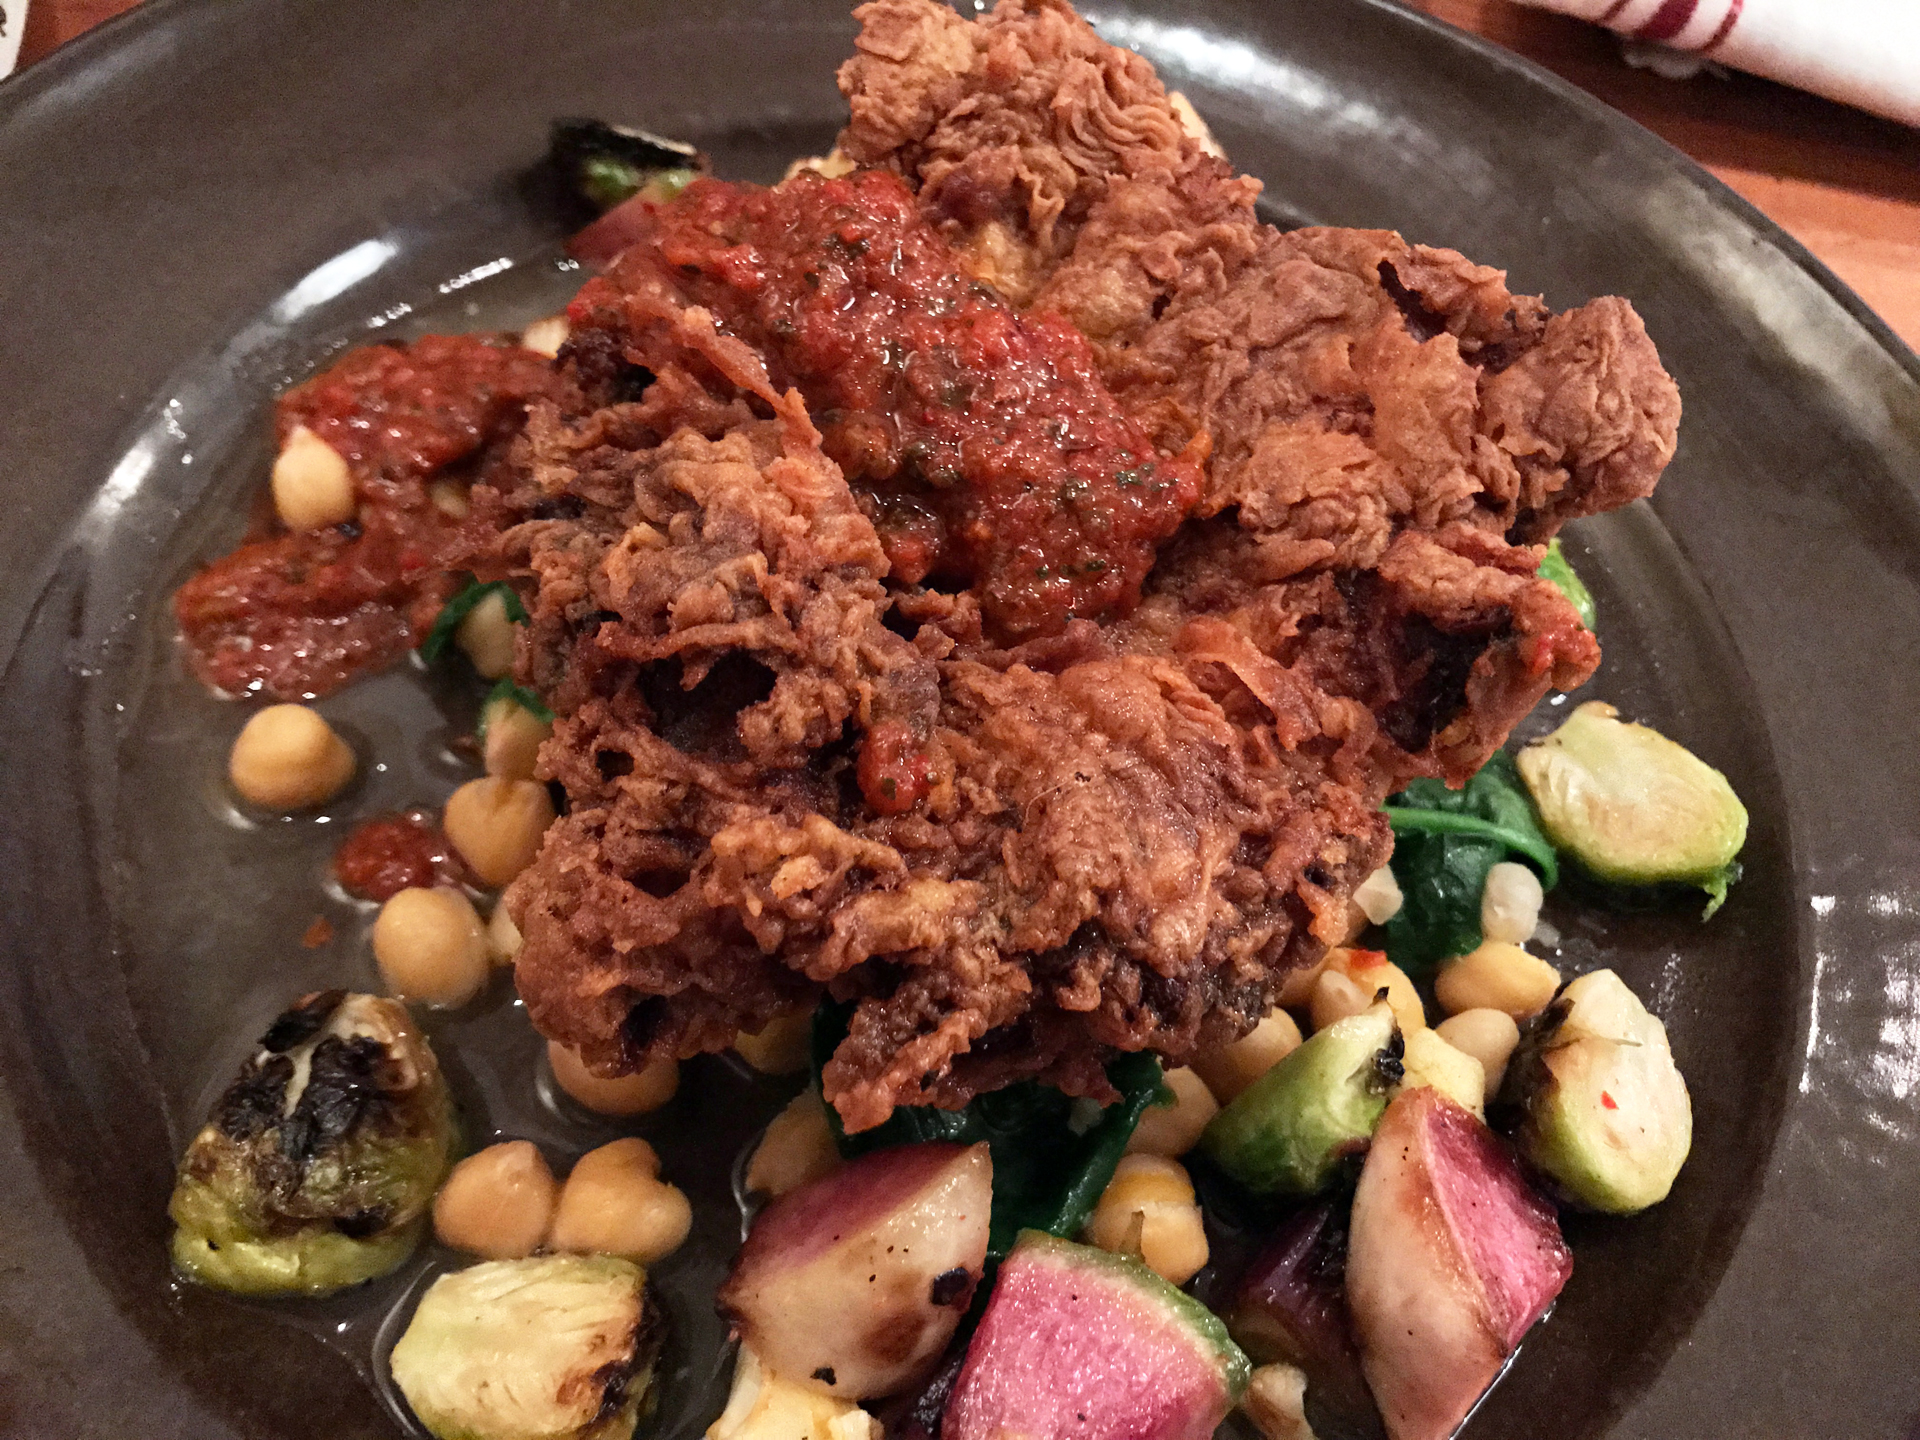 A decadent Italian version of classic fried chicken at Pizzaiolo in Temescal.